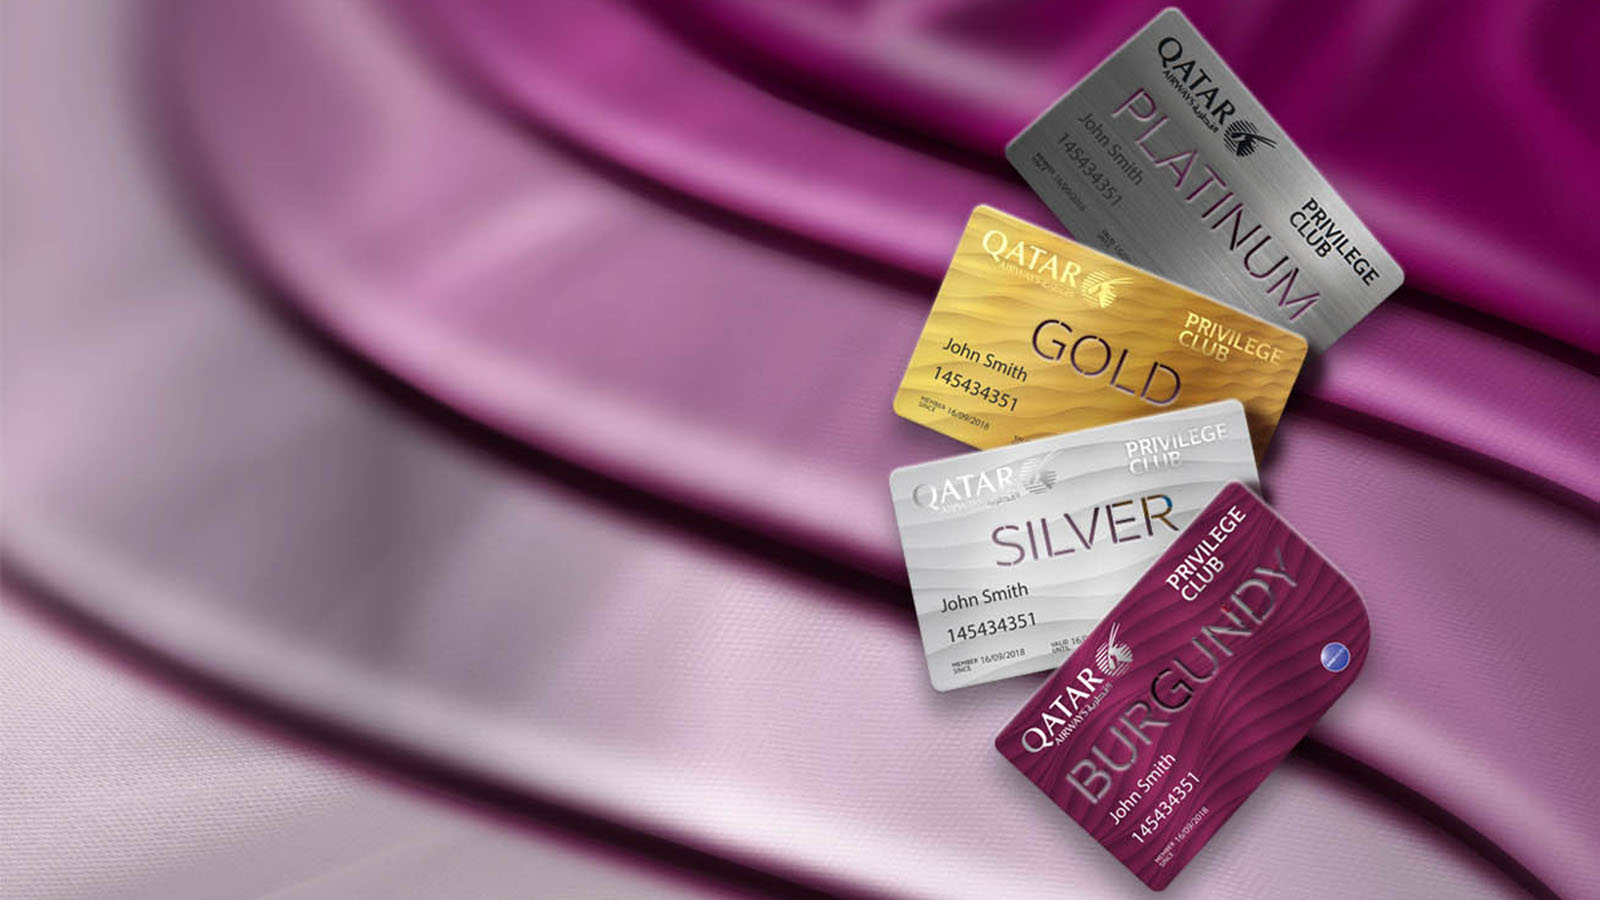 Student Club is your ticket to Privilege Club Silver or higher.